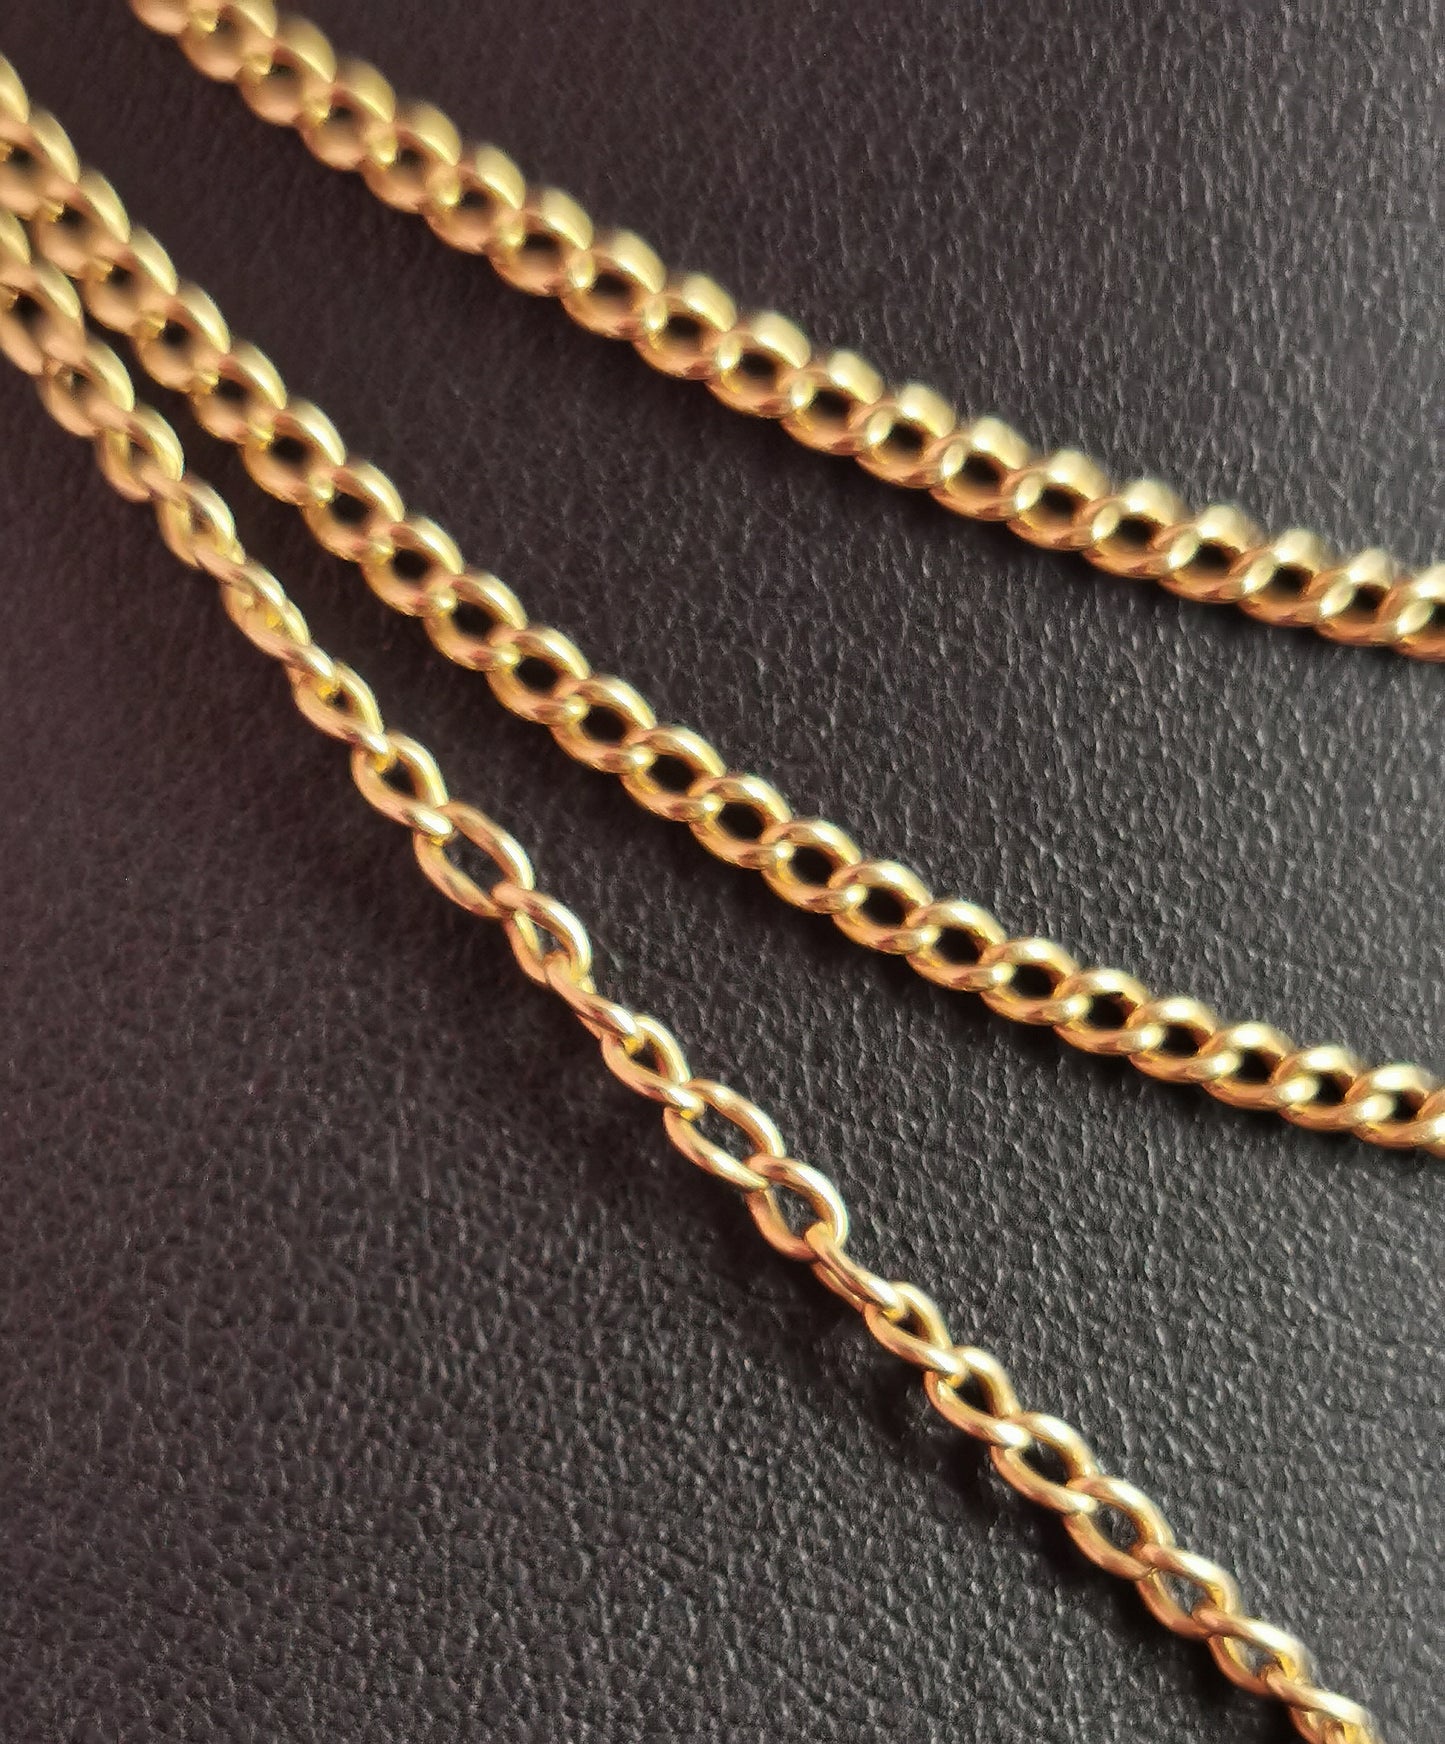 Antique 18ct yellow gold longuard chain necklace, Victorian